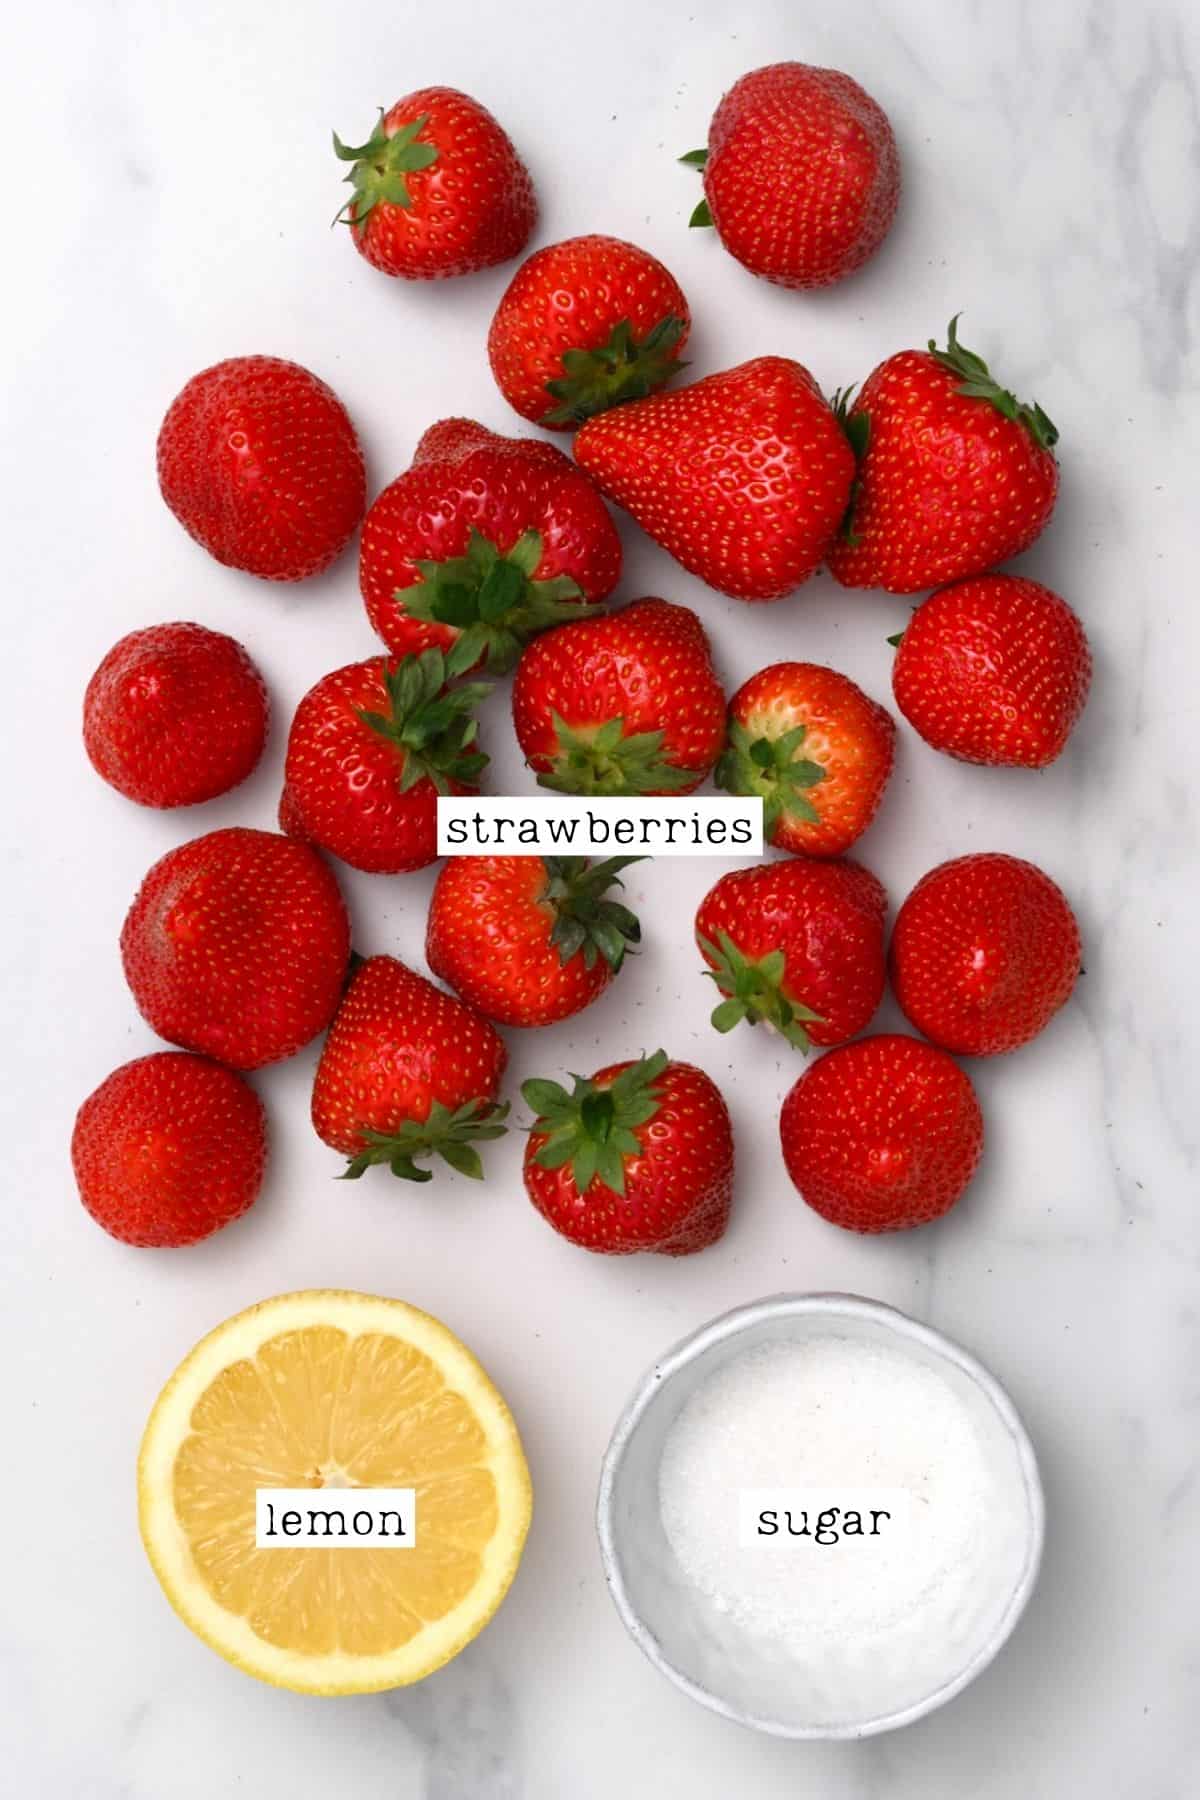 Ingredients for strawberry compote